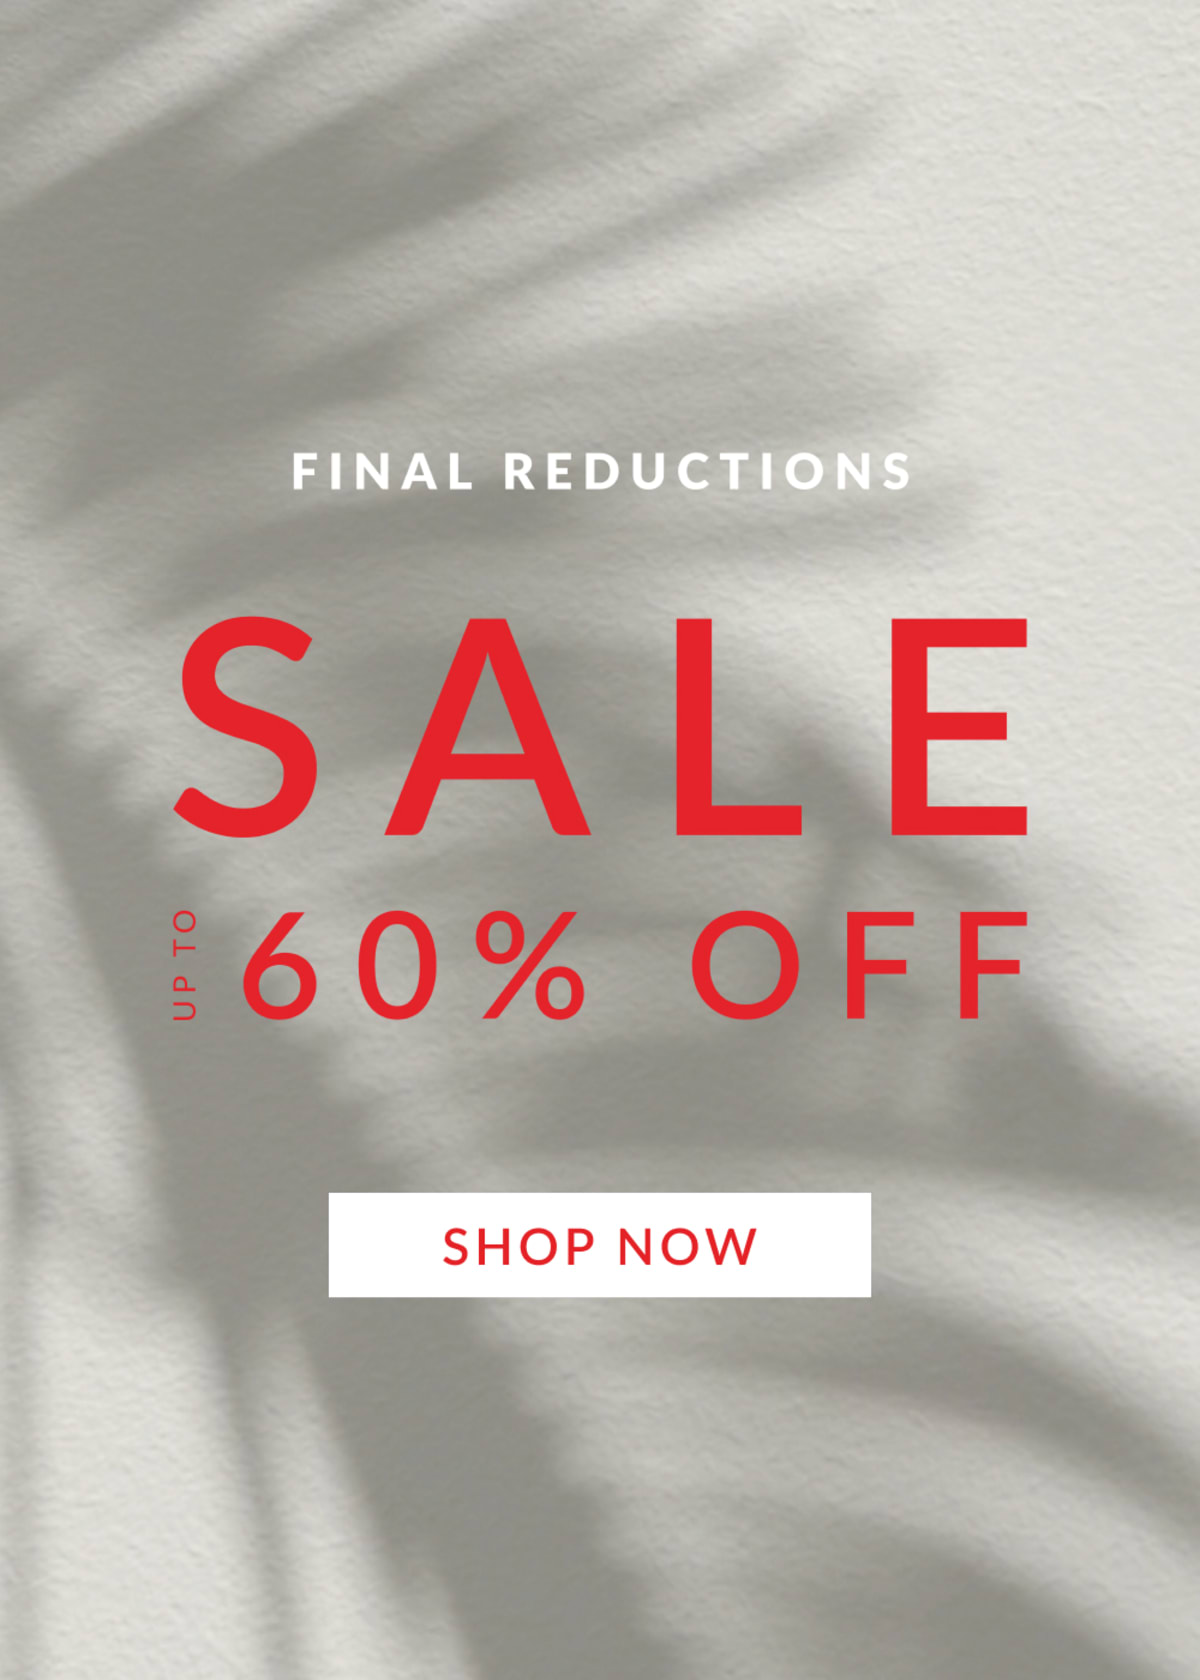 Final Reductions